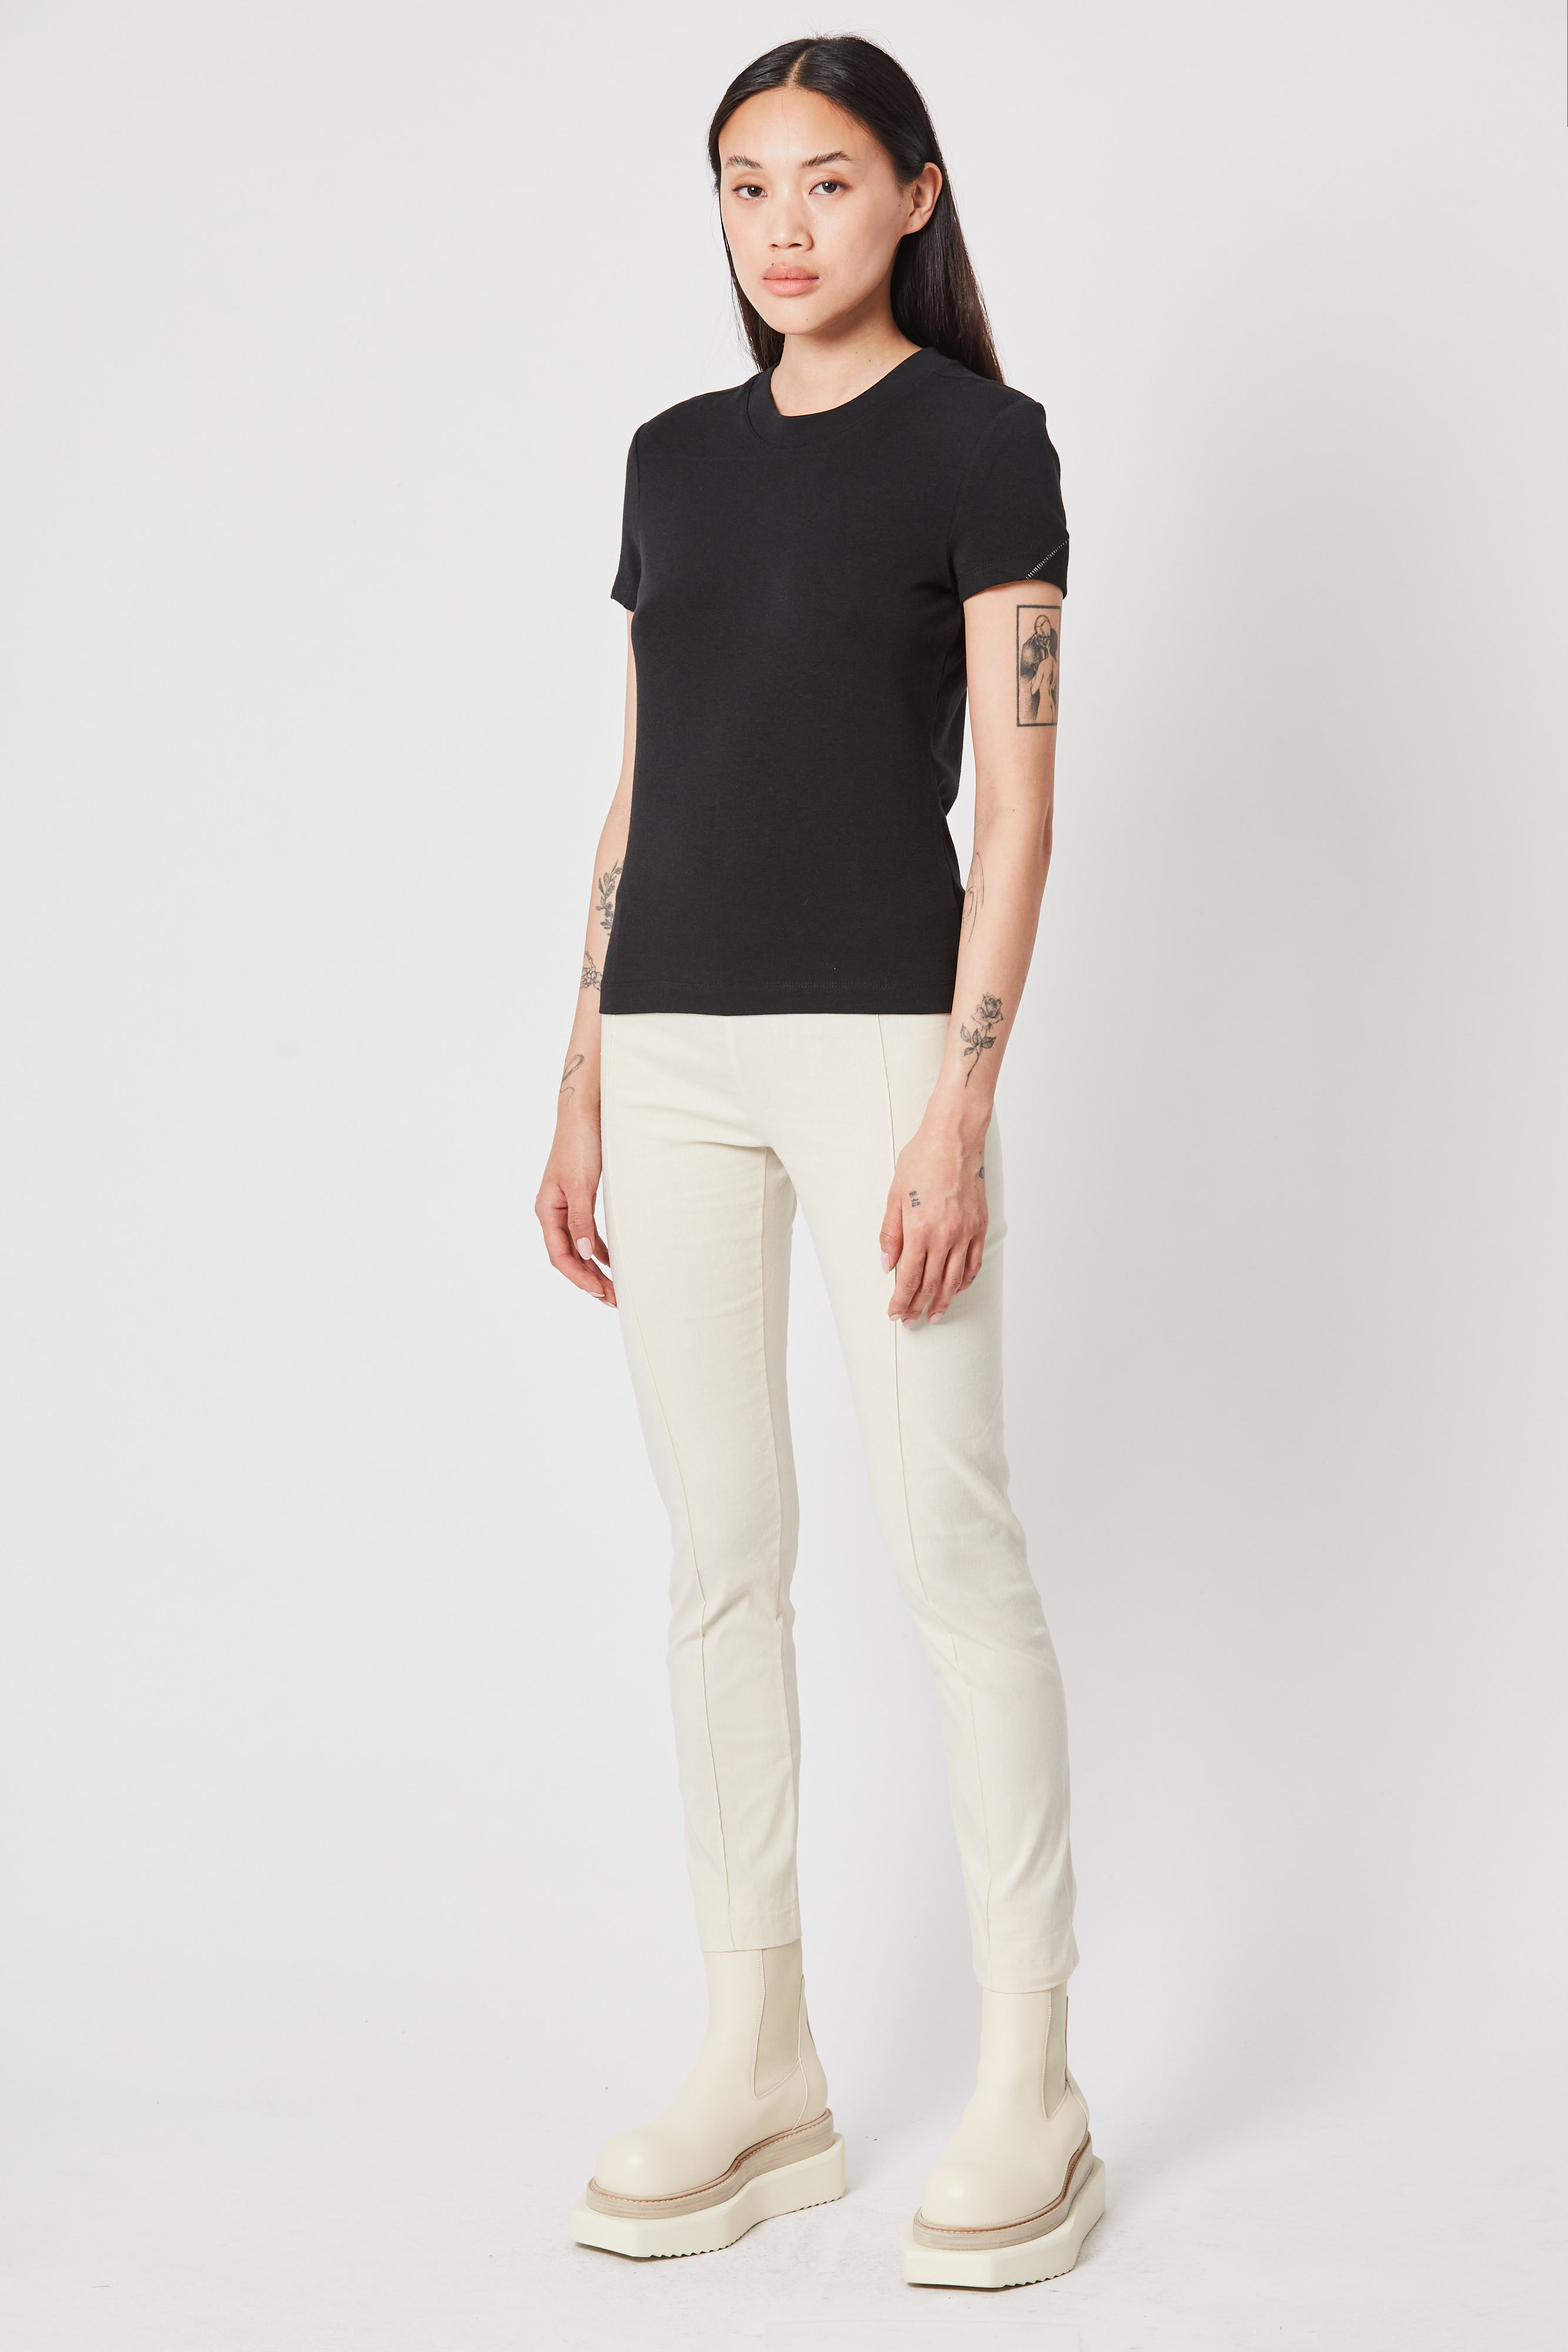 Thom Krom T-Shirt with Stitches in Black